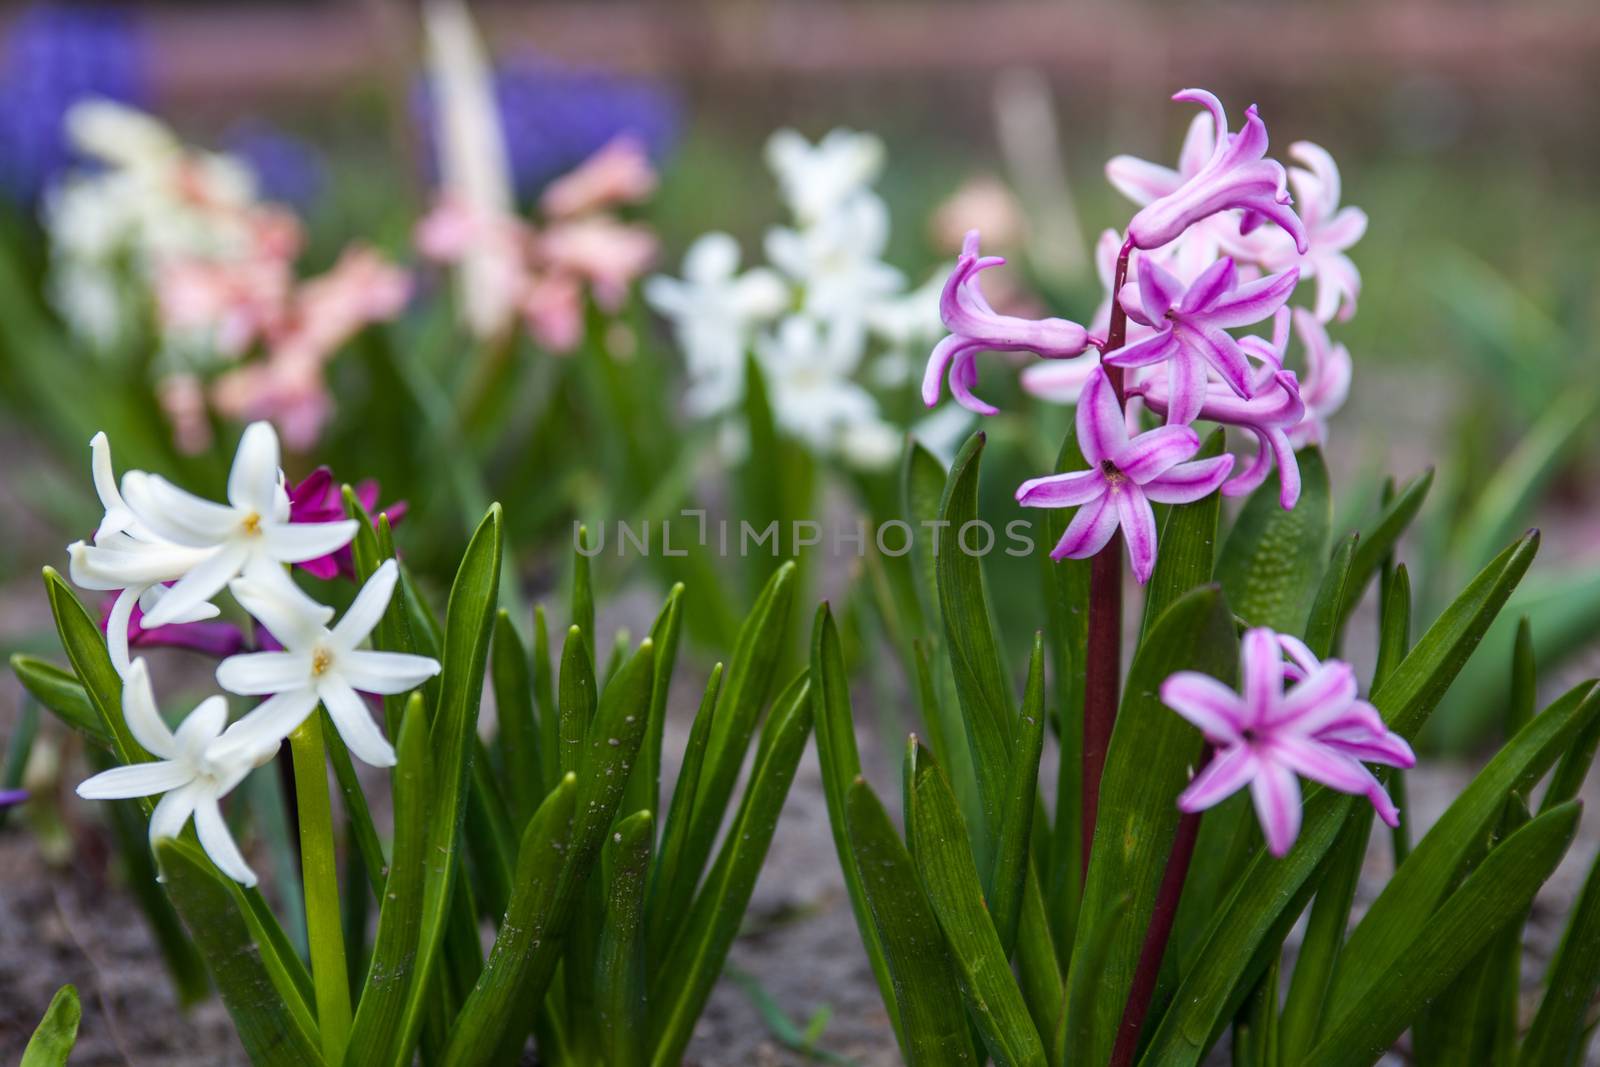 Flowers of Hyacinth  by rootstocks